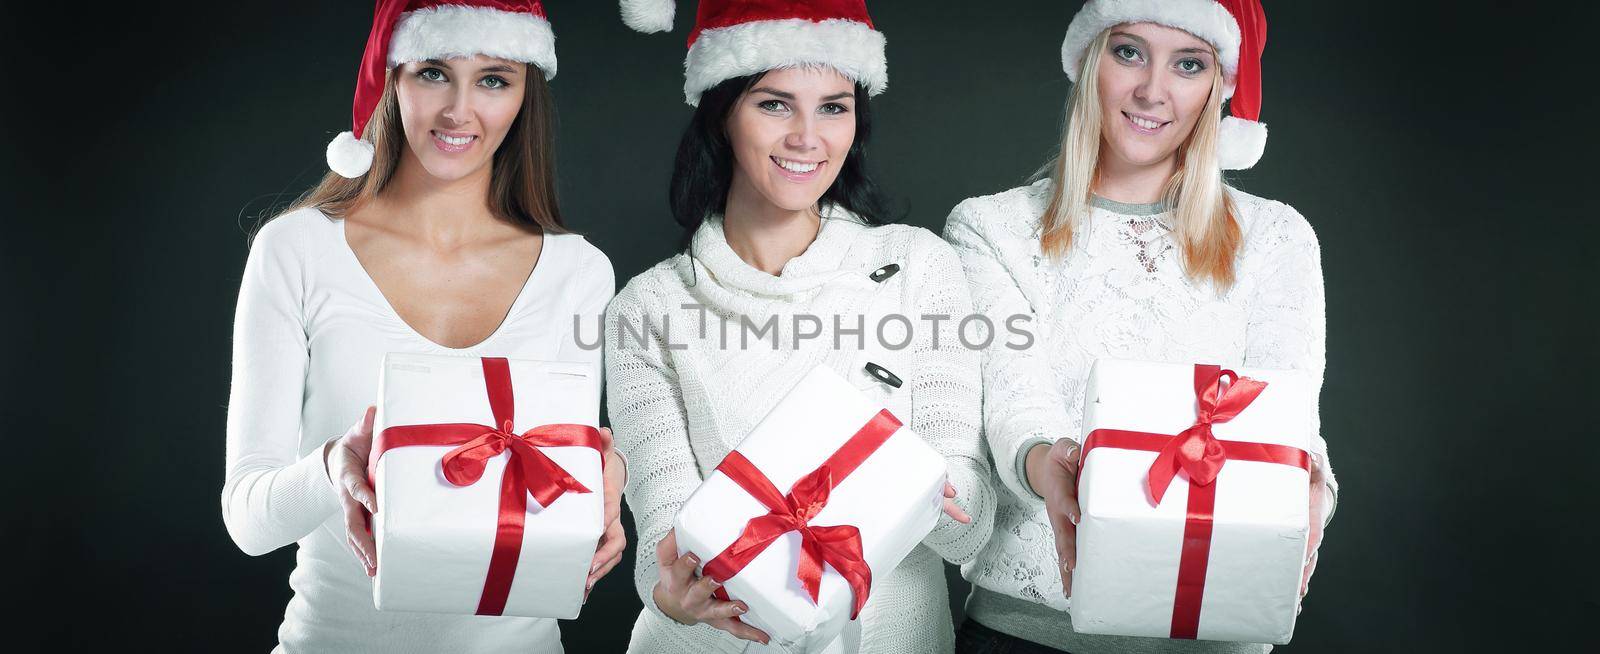 three young women in costume of Santa Claus with Christmas shopping.photo with copy space.